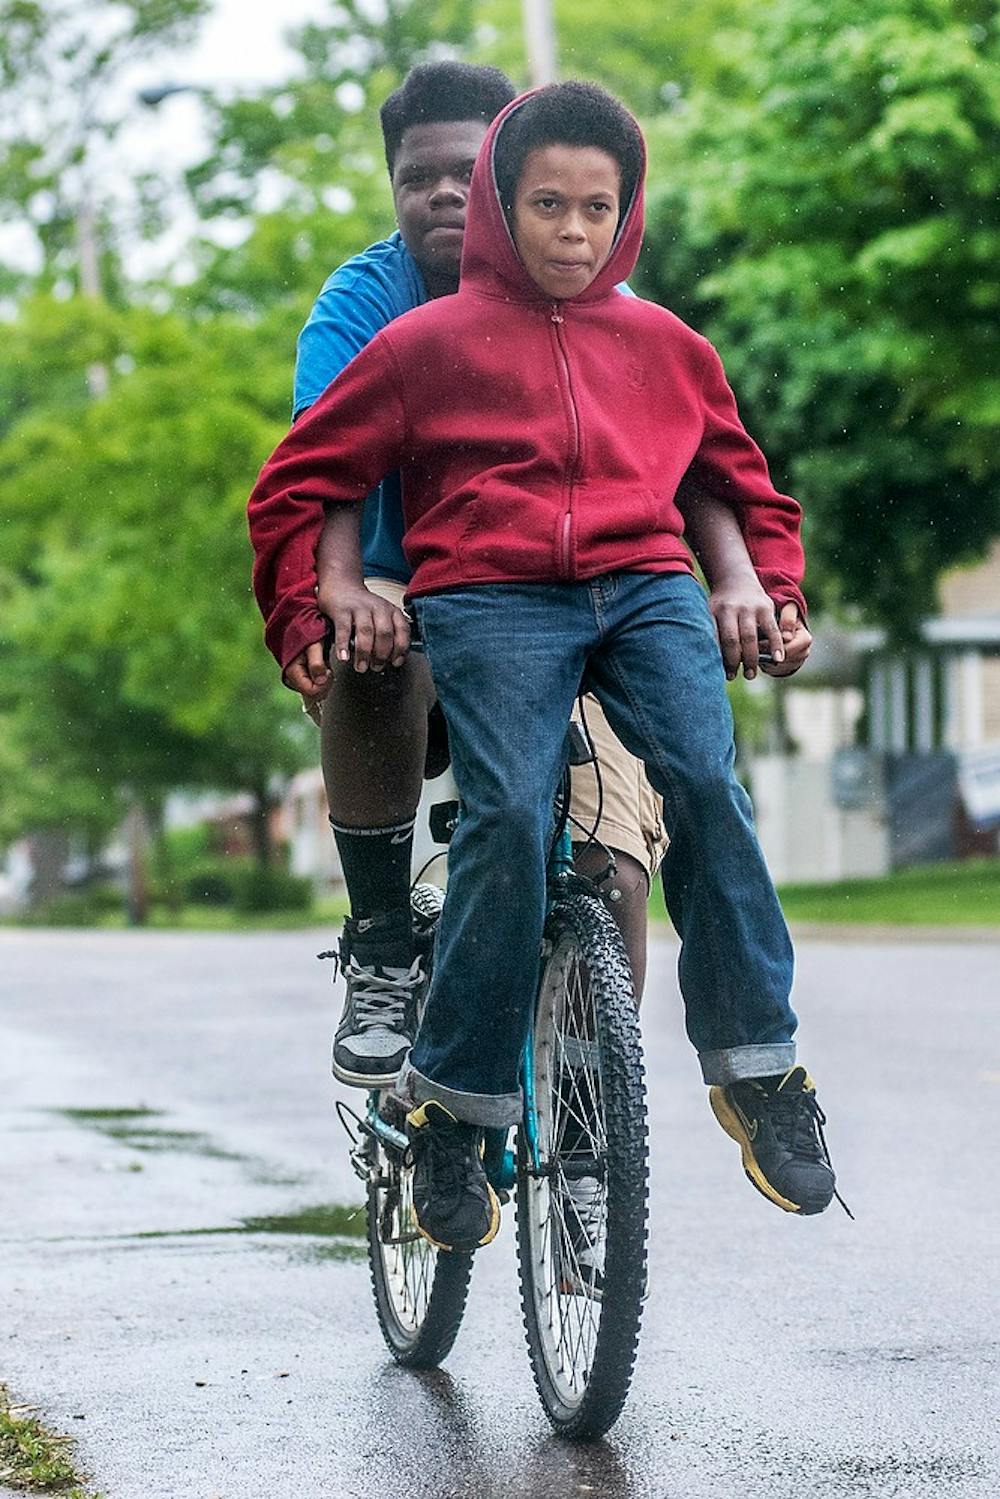 	<p>Linwood Cannon, 12, of Lansing, sits on the bike handlebars as Lansing resident Daequan Thomas, 13, rides the bike en route to West Ottawa Street in Lansing as the two head home, May 27, 2013. &#8220;We don&#8217;t care (about the rain),&#8221; Cannon said. &#8220;We are just having fun.&#8221; Justin Wan/The State News</p>